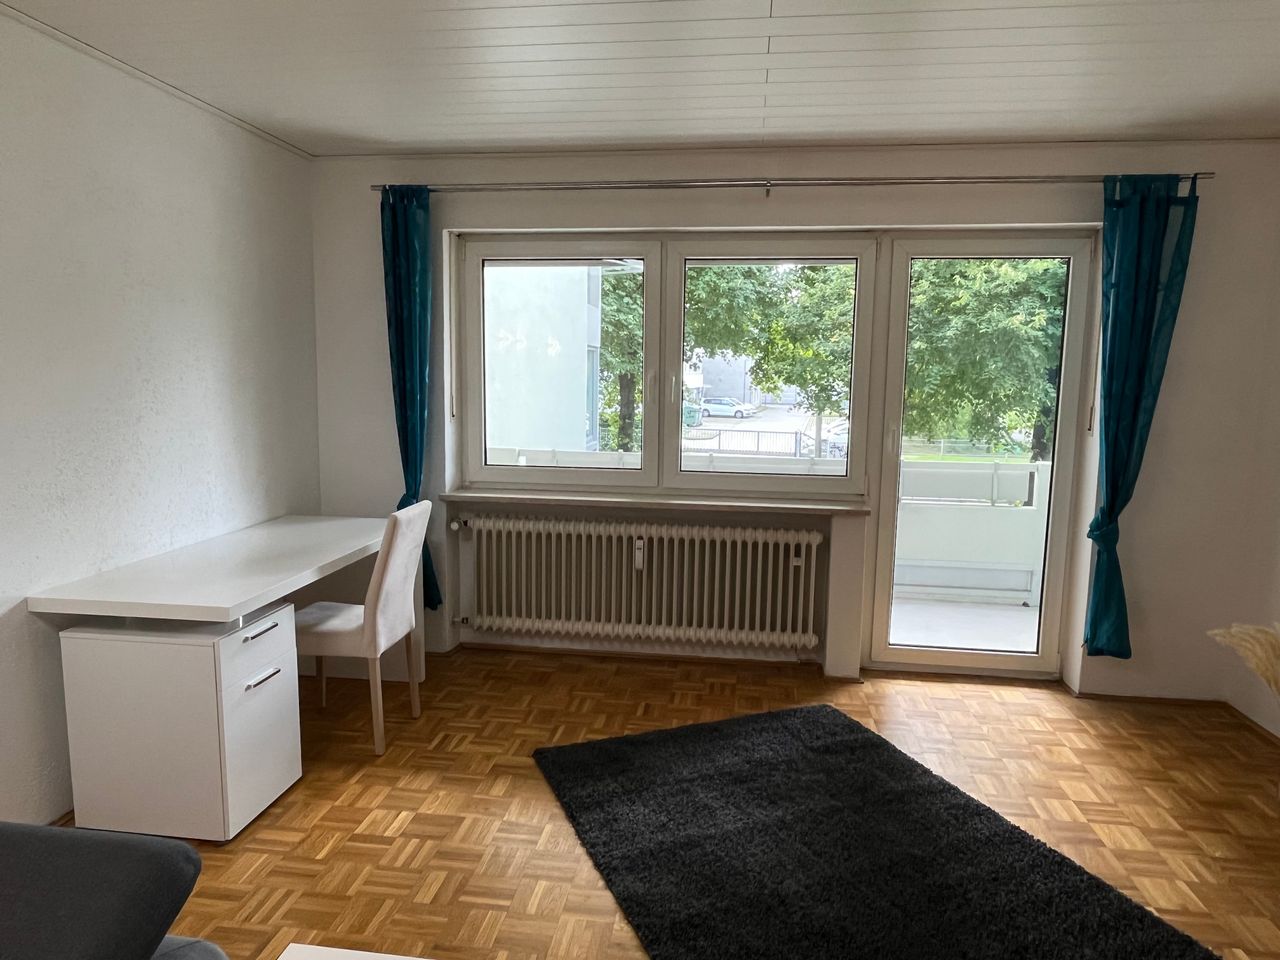 Fully furnished flat in central Regensburg with balcony